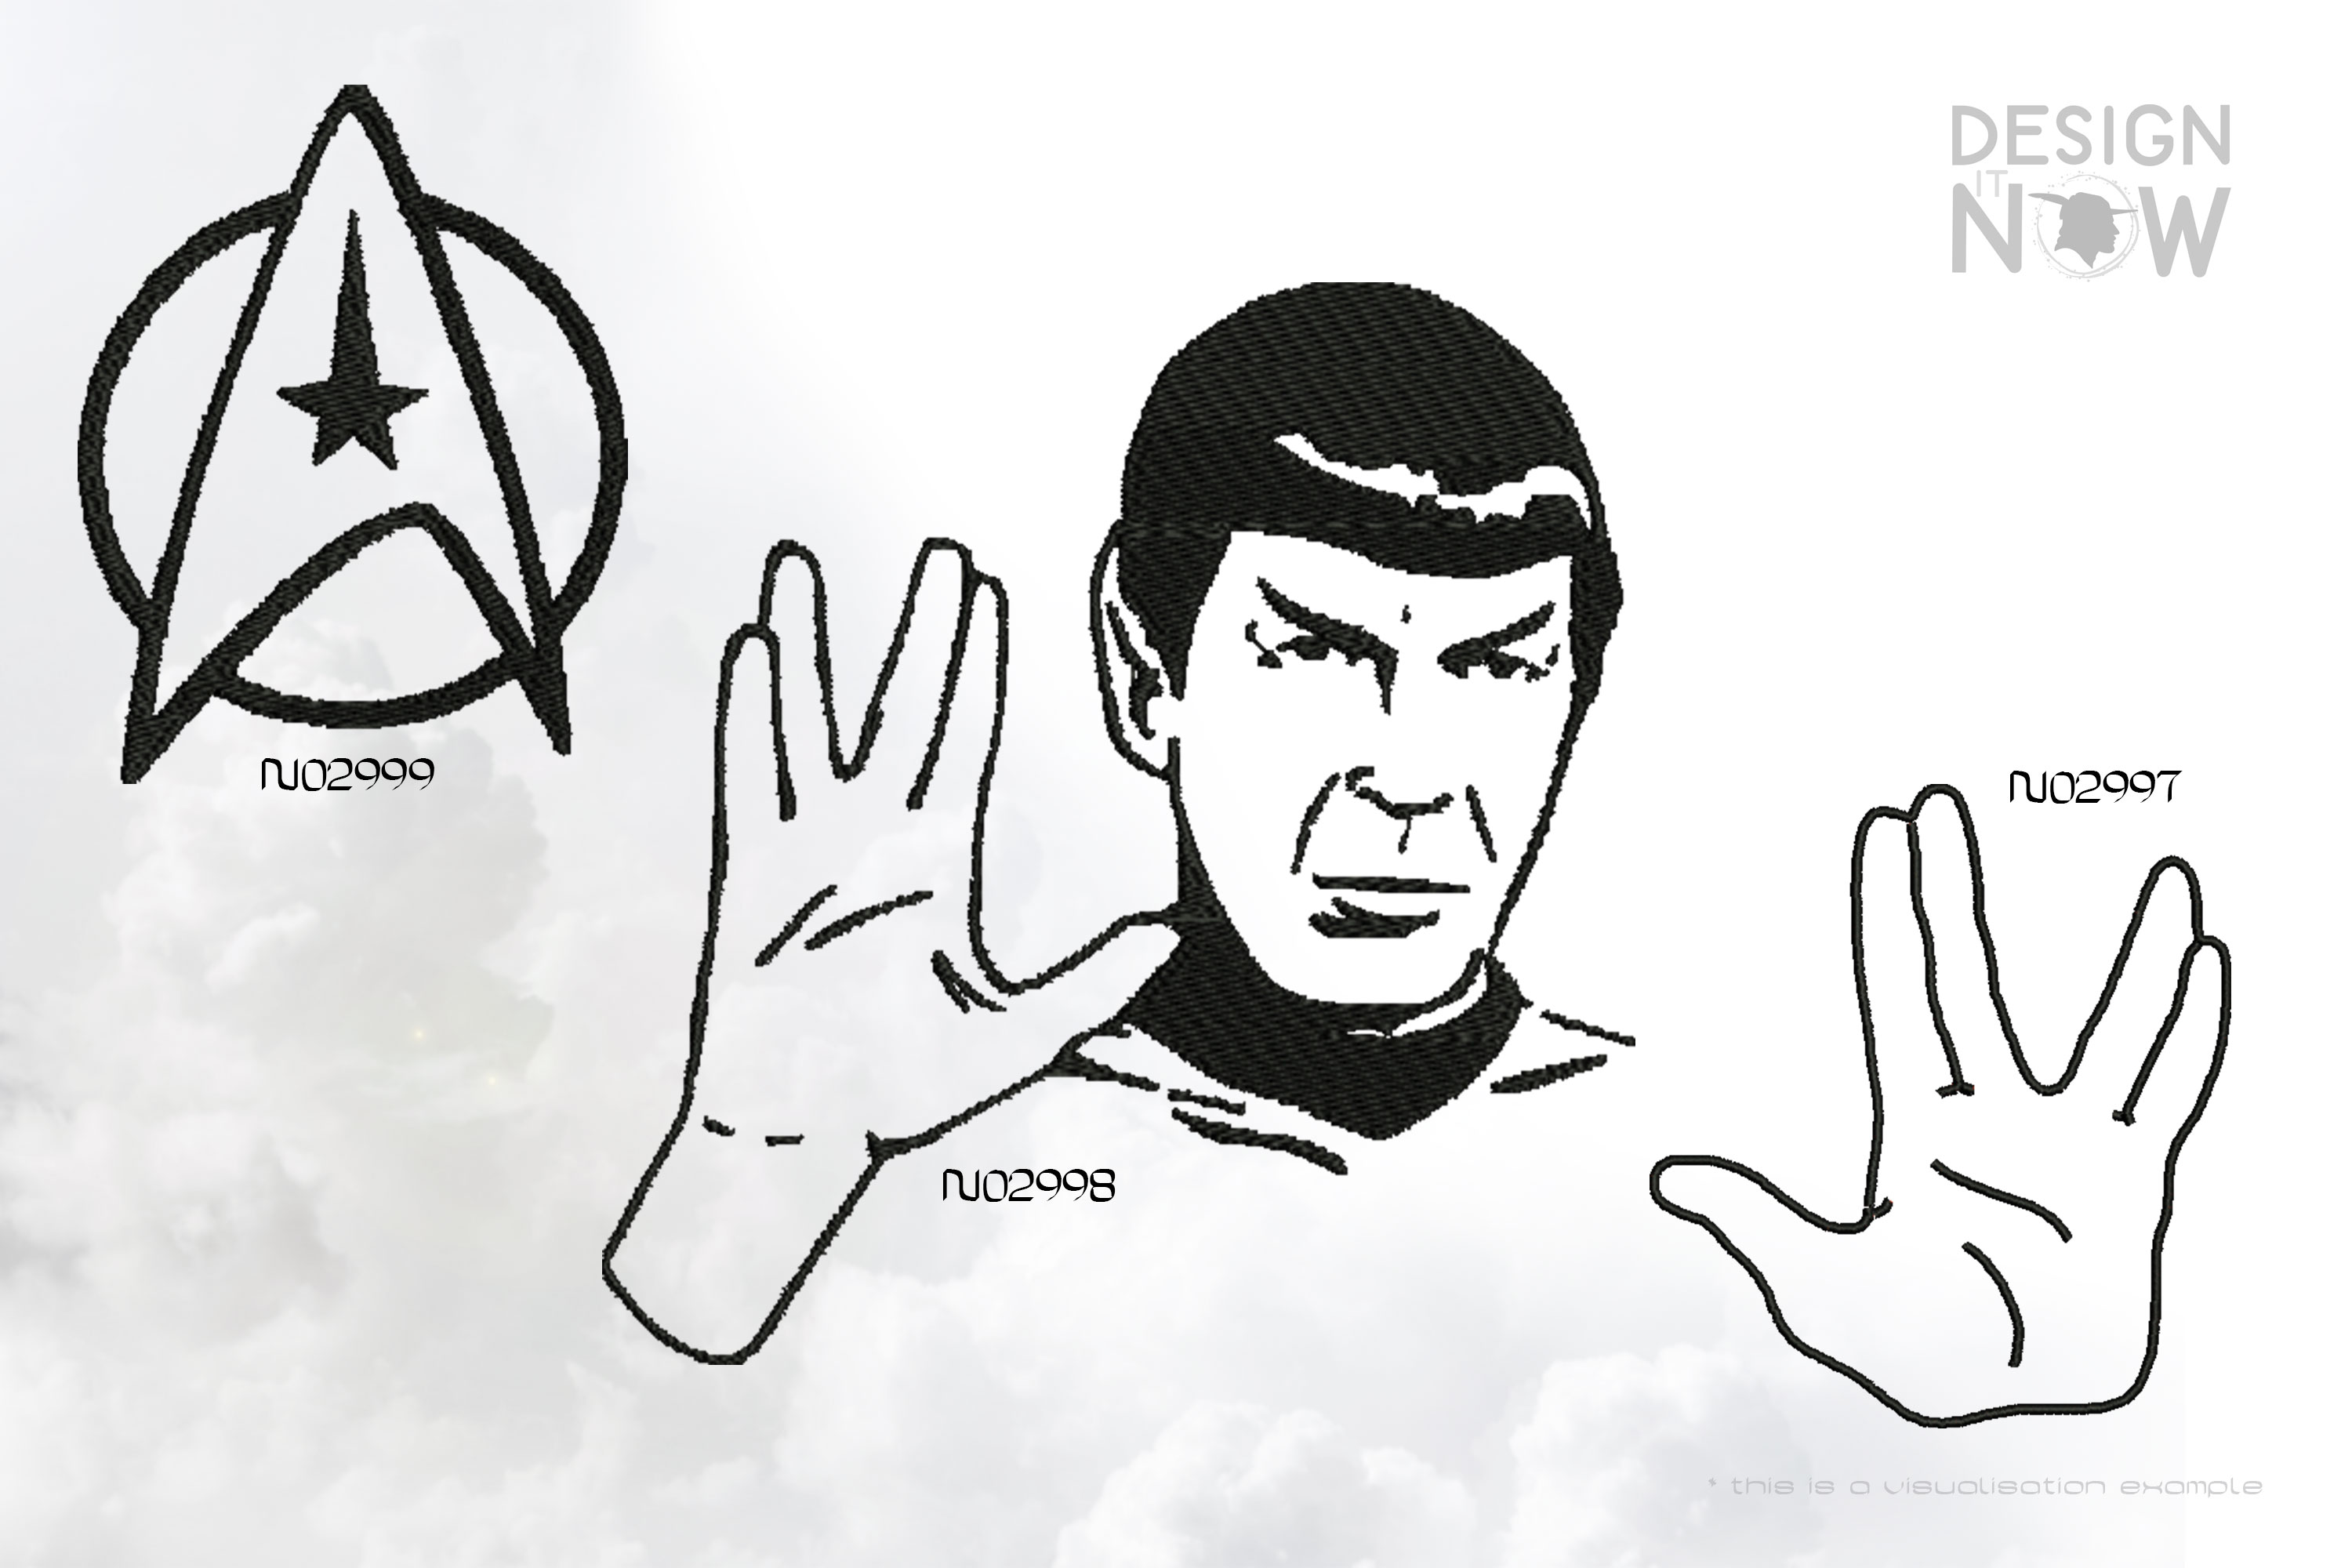 Tribut To Fictional Character Spock aka Spock 